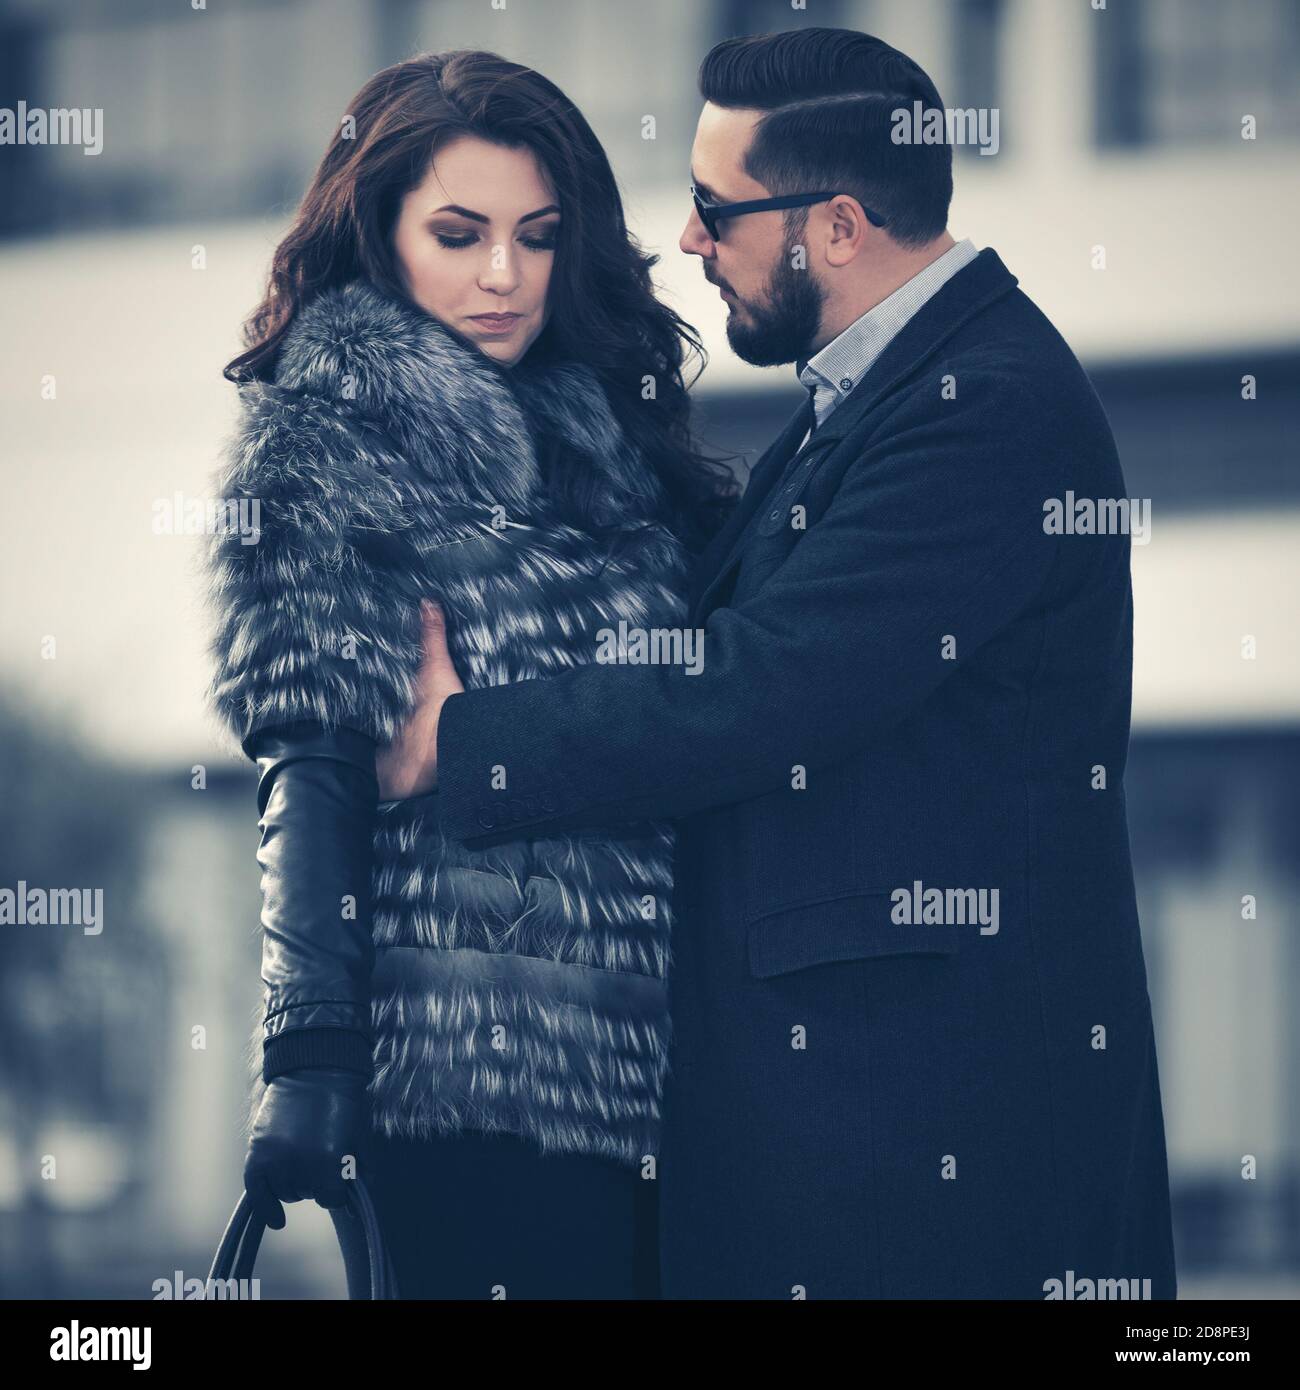 Young fashion couple in conflict in city street Stock Photo